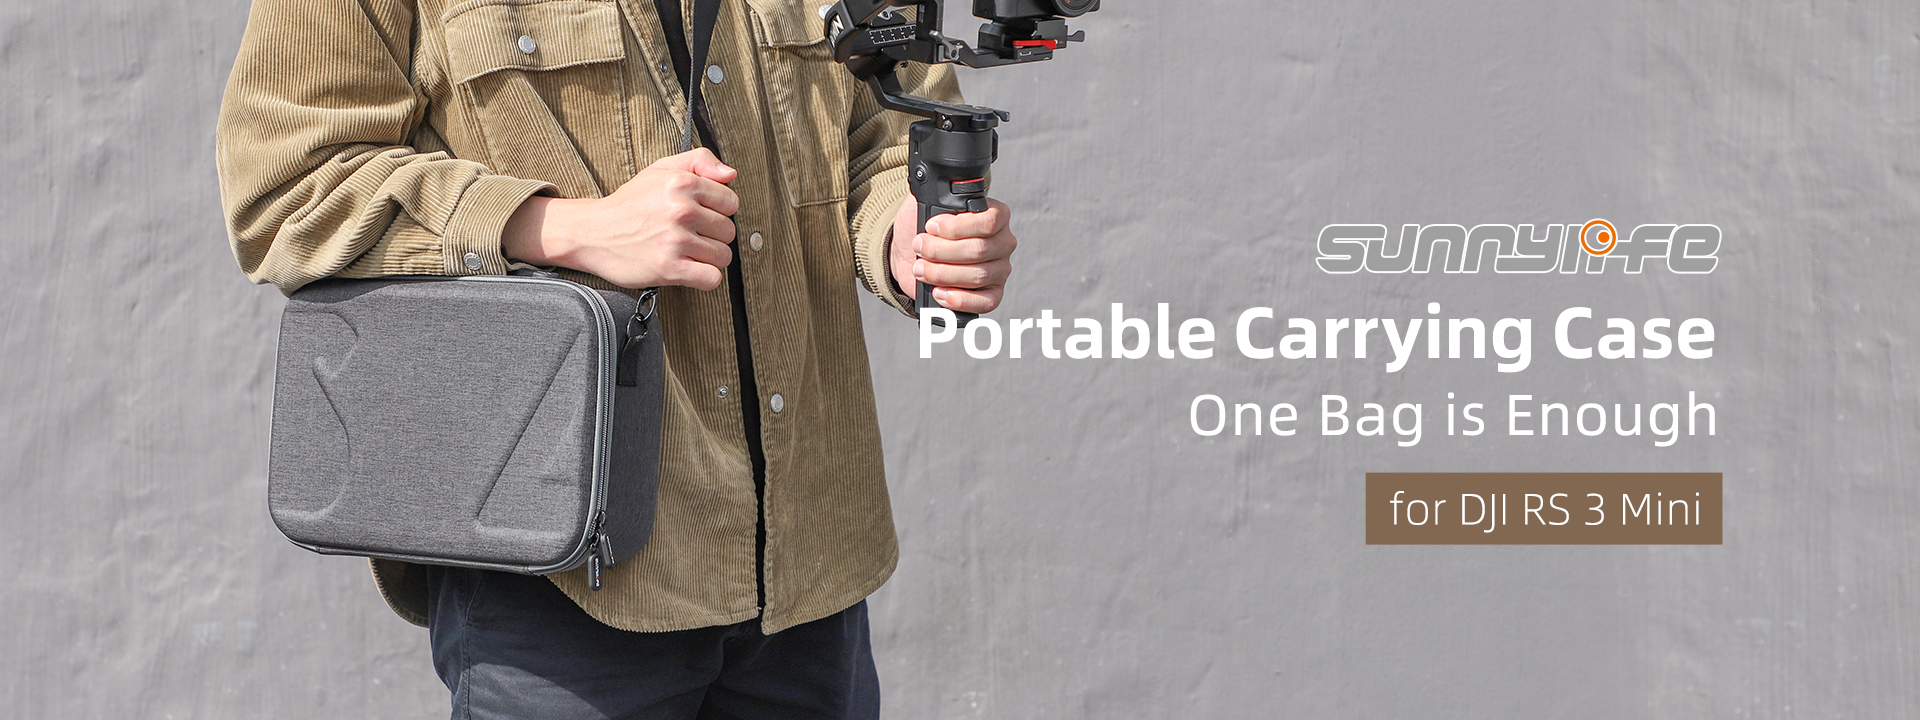 Carrying Case for DJI RS 3 Mini